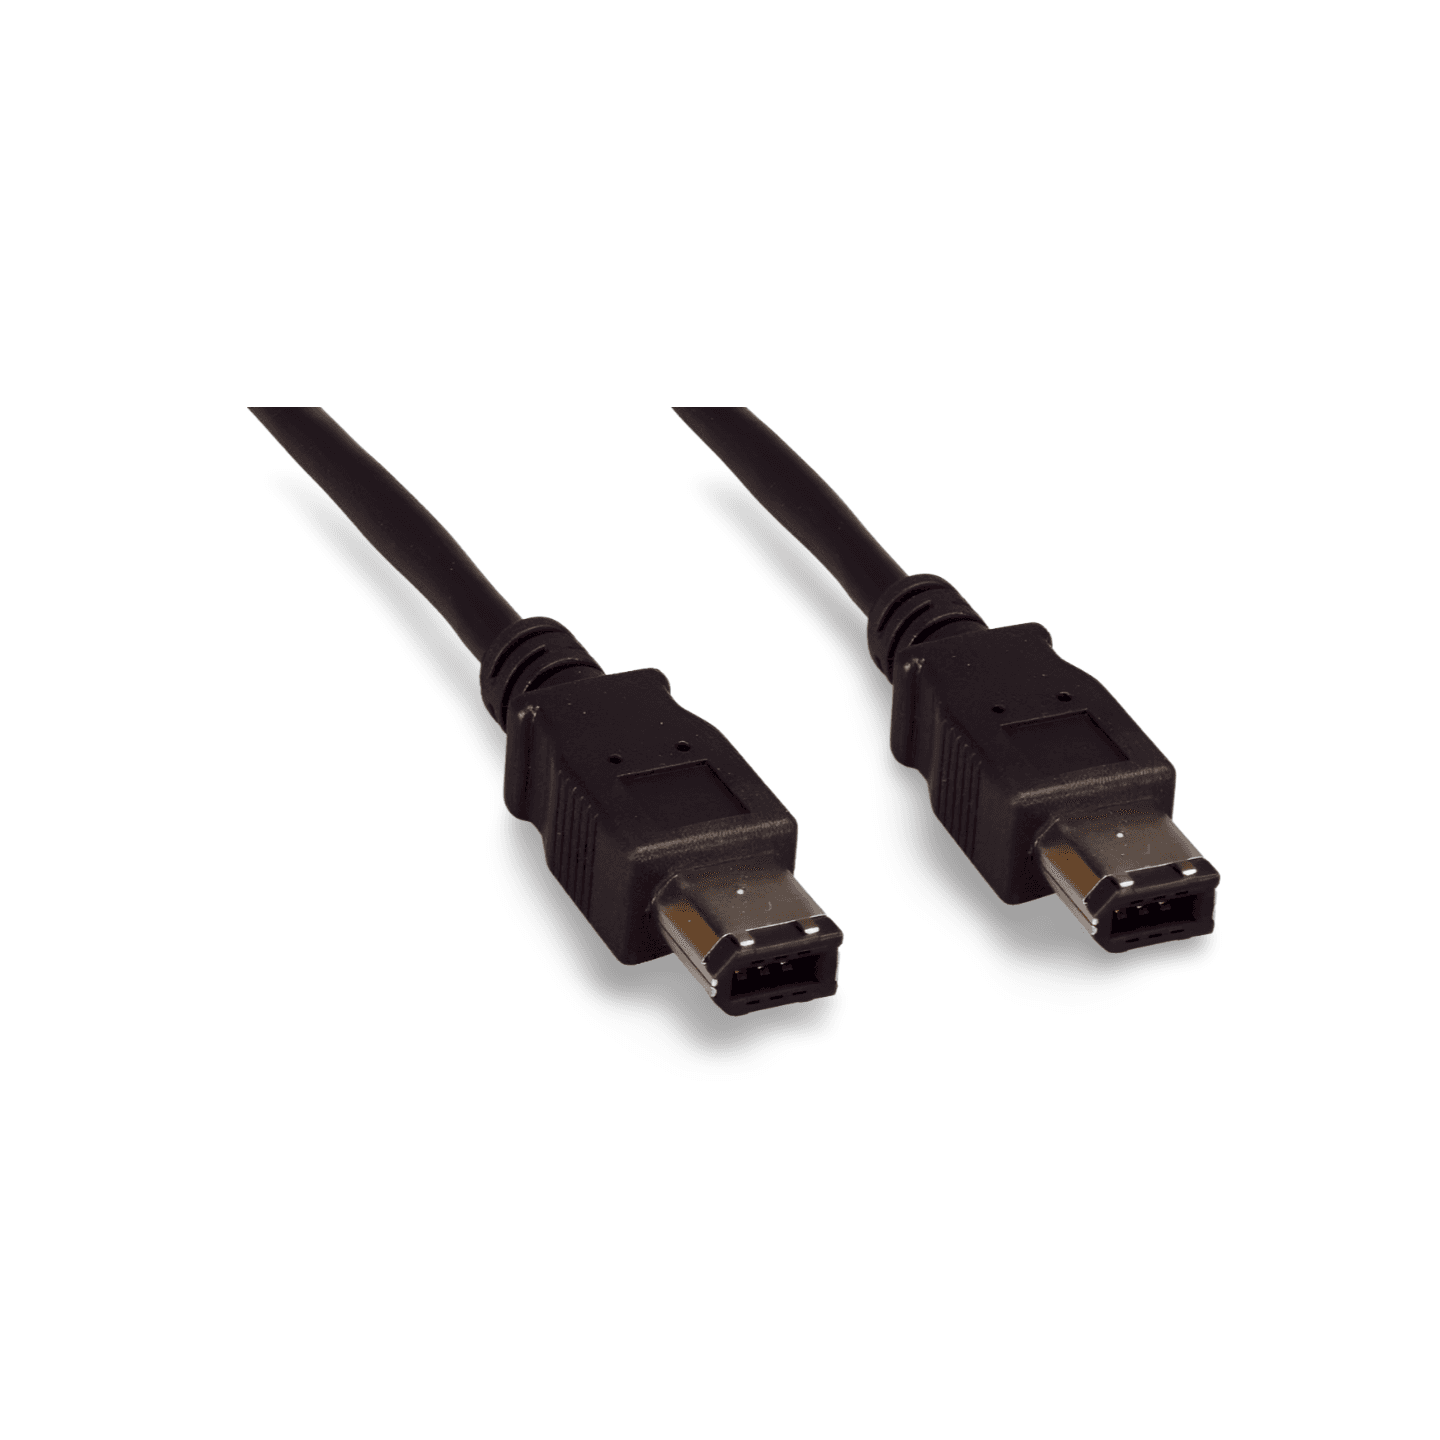 1 2ft Firewire Cable 6 Pin to 6 Pin black